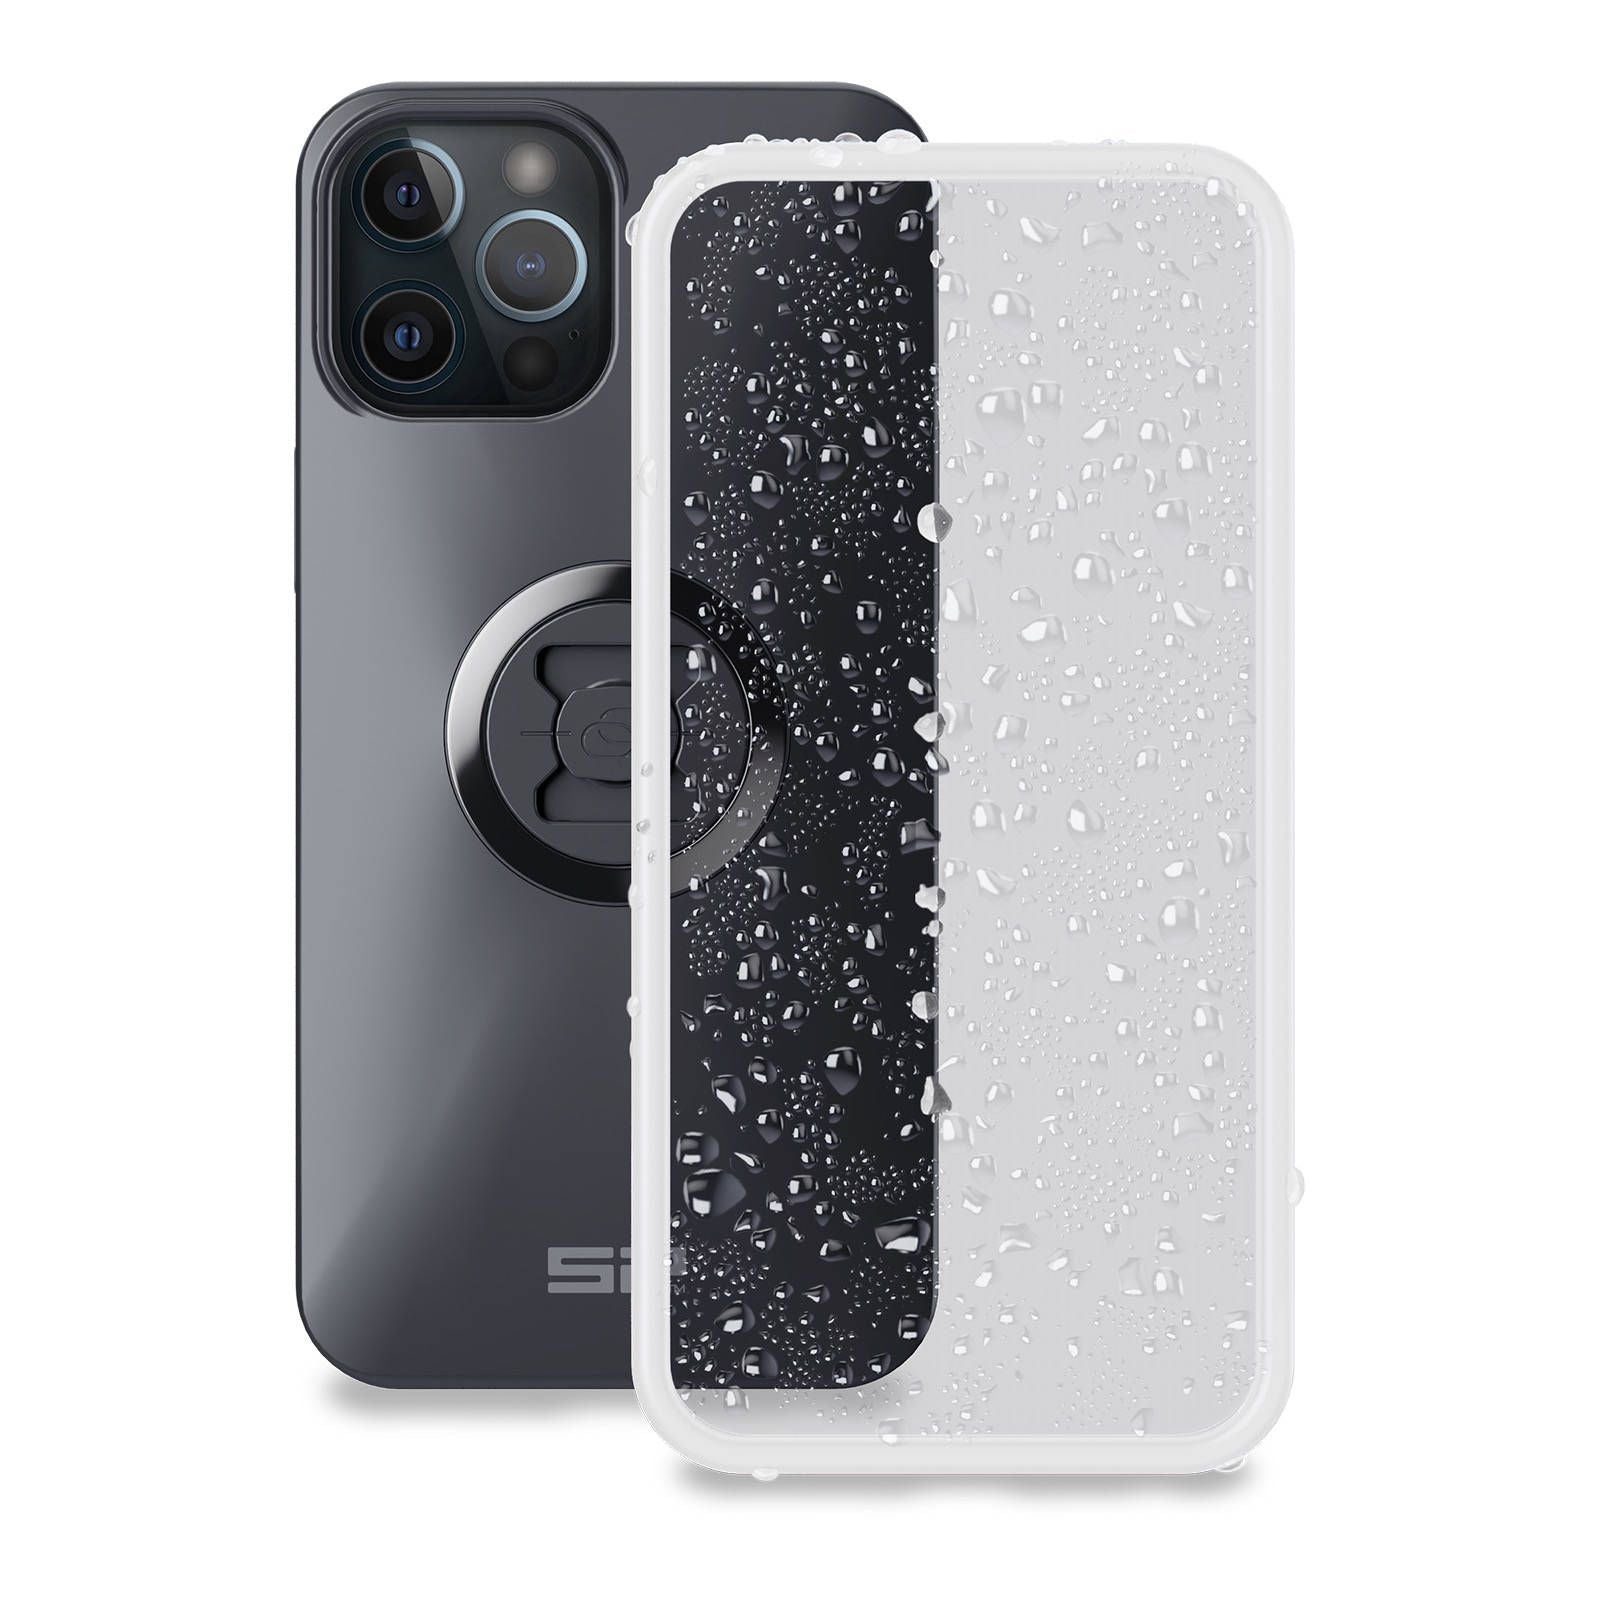 New SP CONNECT WEATHER COVER APPLE IPHONE 12 PRO MAX SPC55234